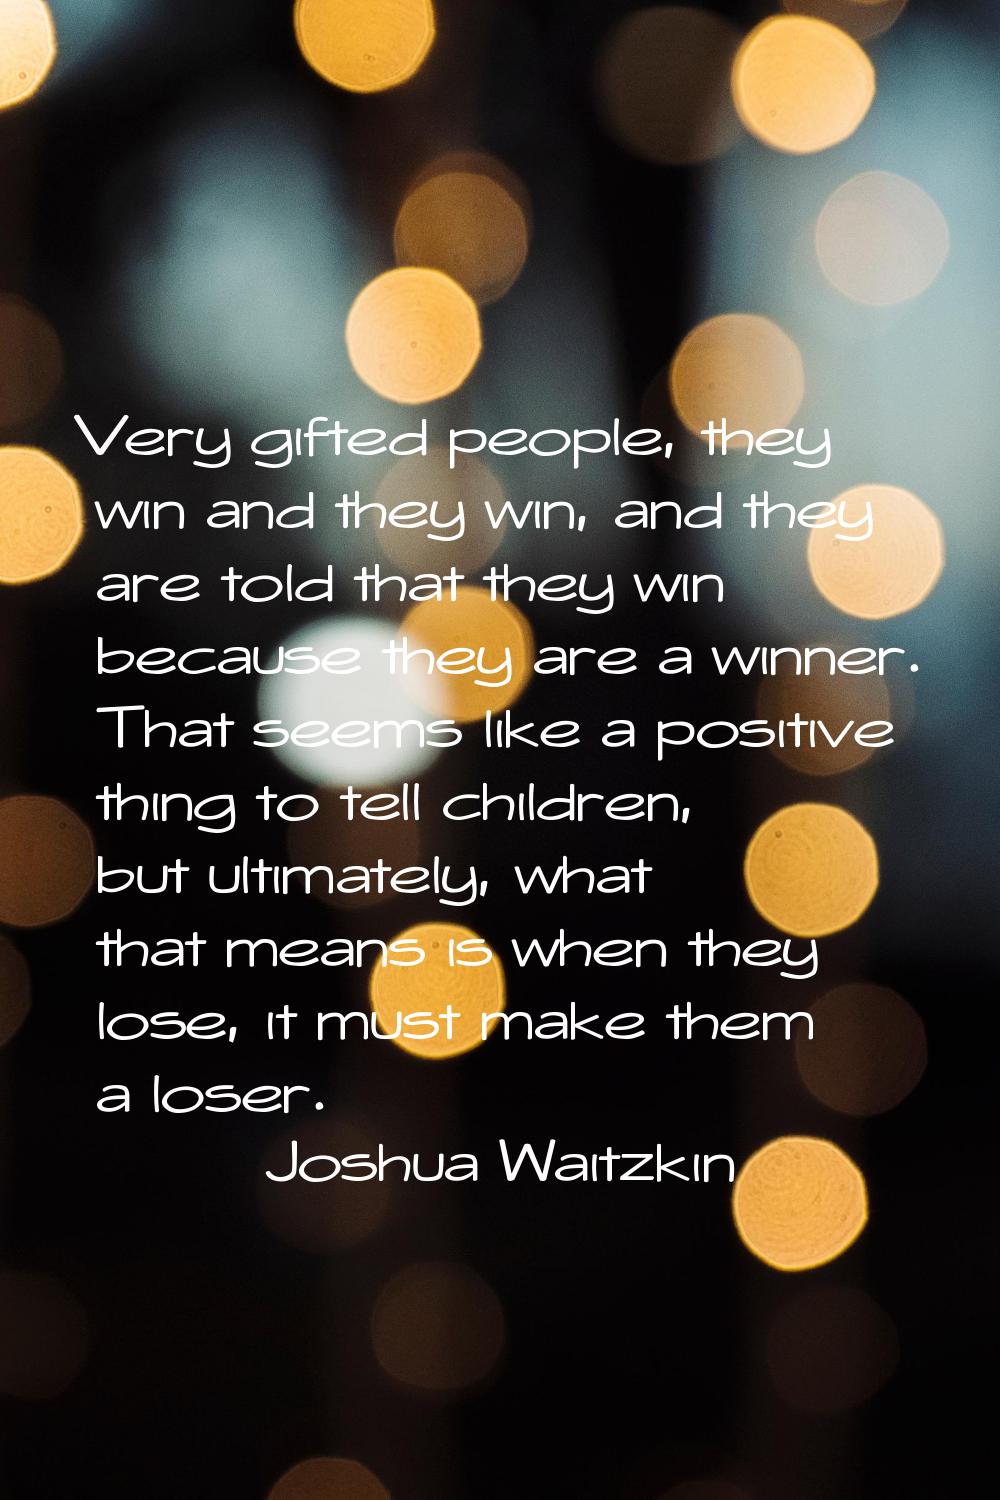 Very gifted people, they win and they win, and they are told that they win because they are a winne